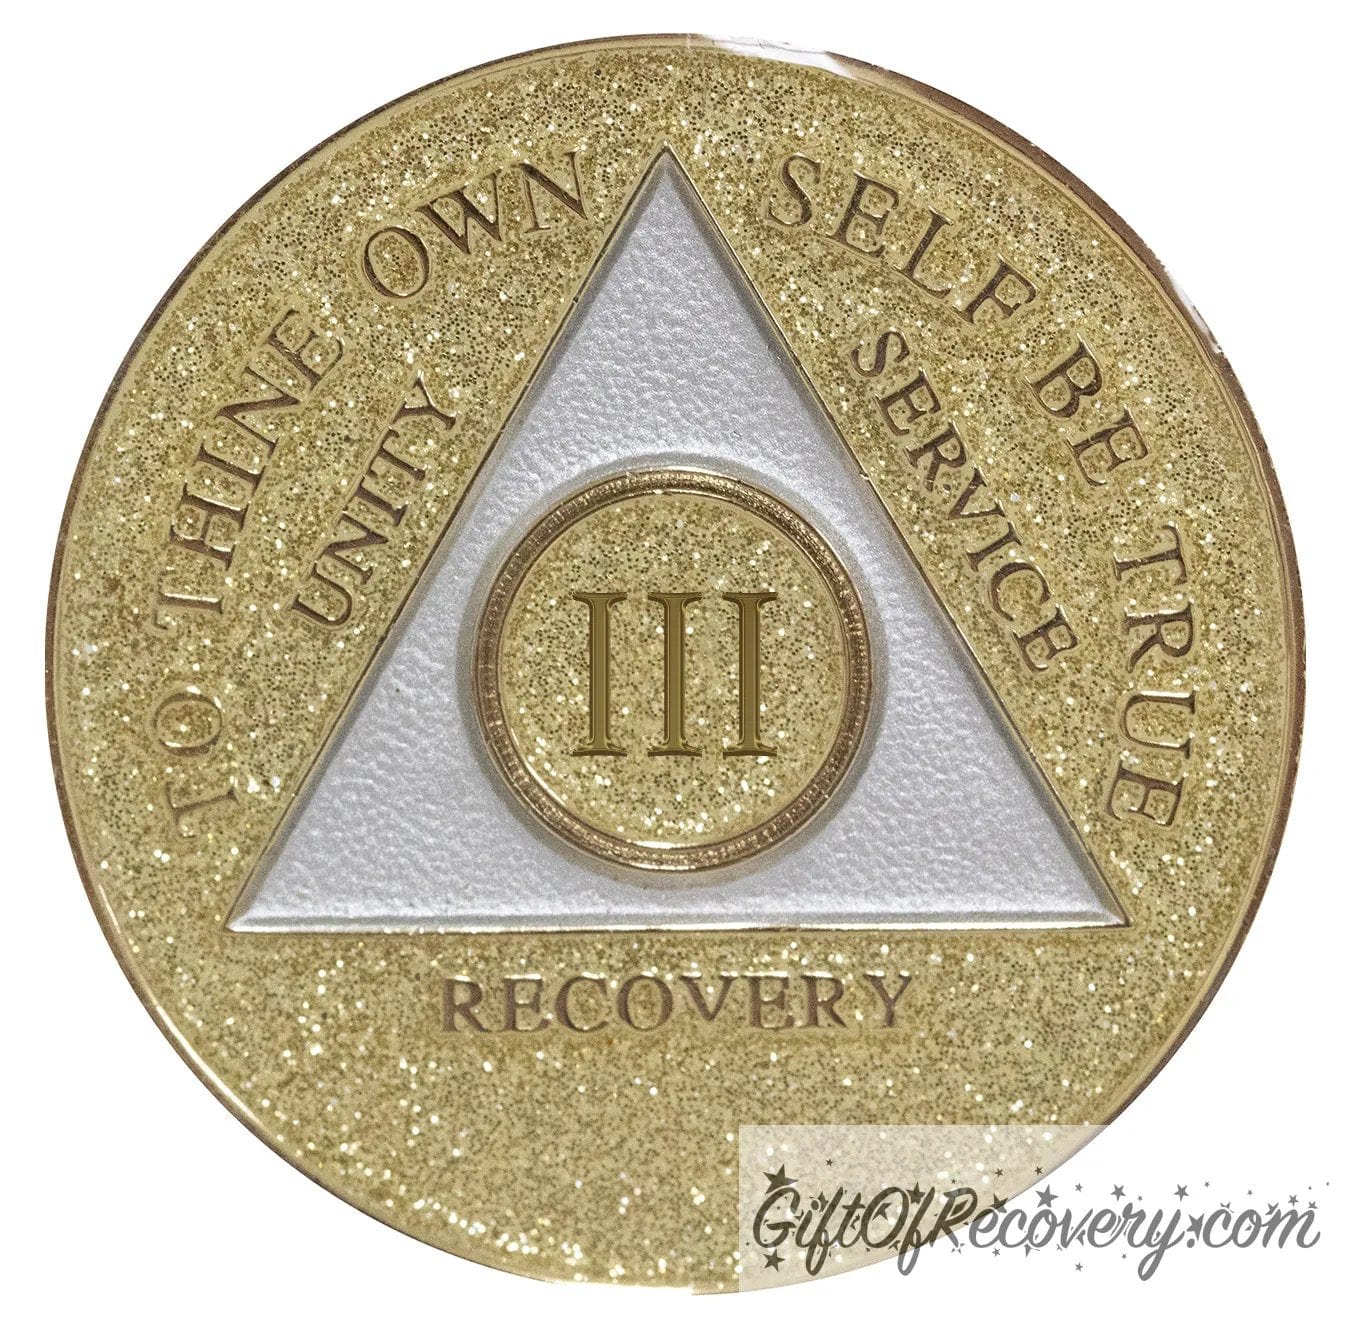 3 year AA medallion Gold glitter, with the triangle pearl white and to thine own self be true, unity, service, recovery, and the roman numeral embossed with 14k gold-plated brass, the recovery medallion is sealed with resin for a shiny finish that will last and is scratch proof.